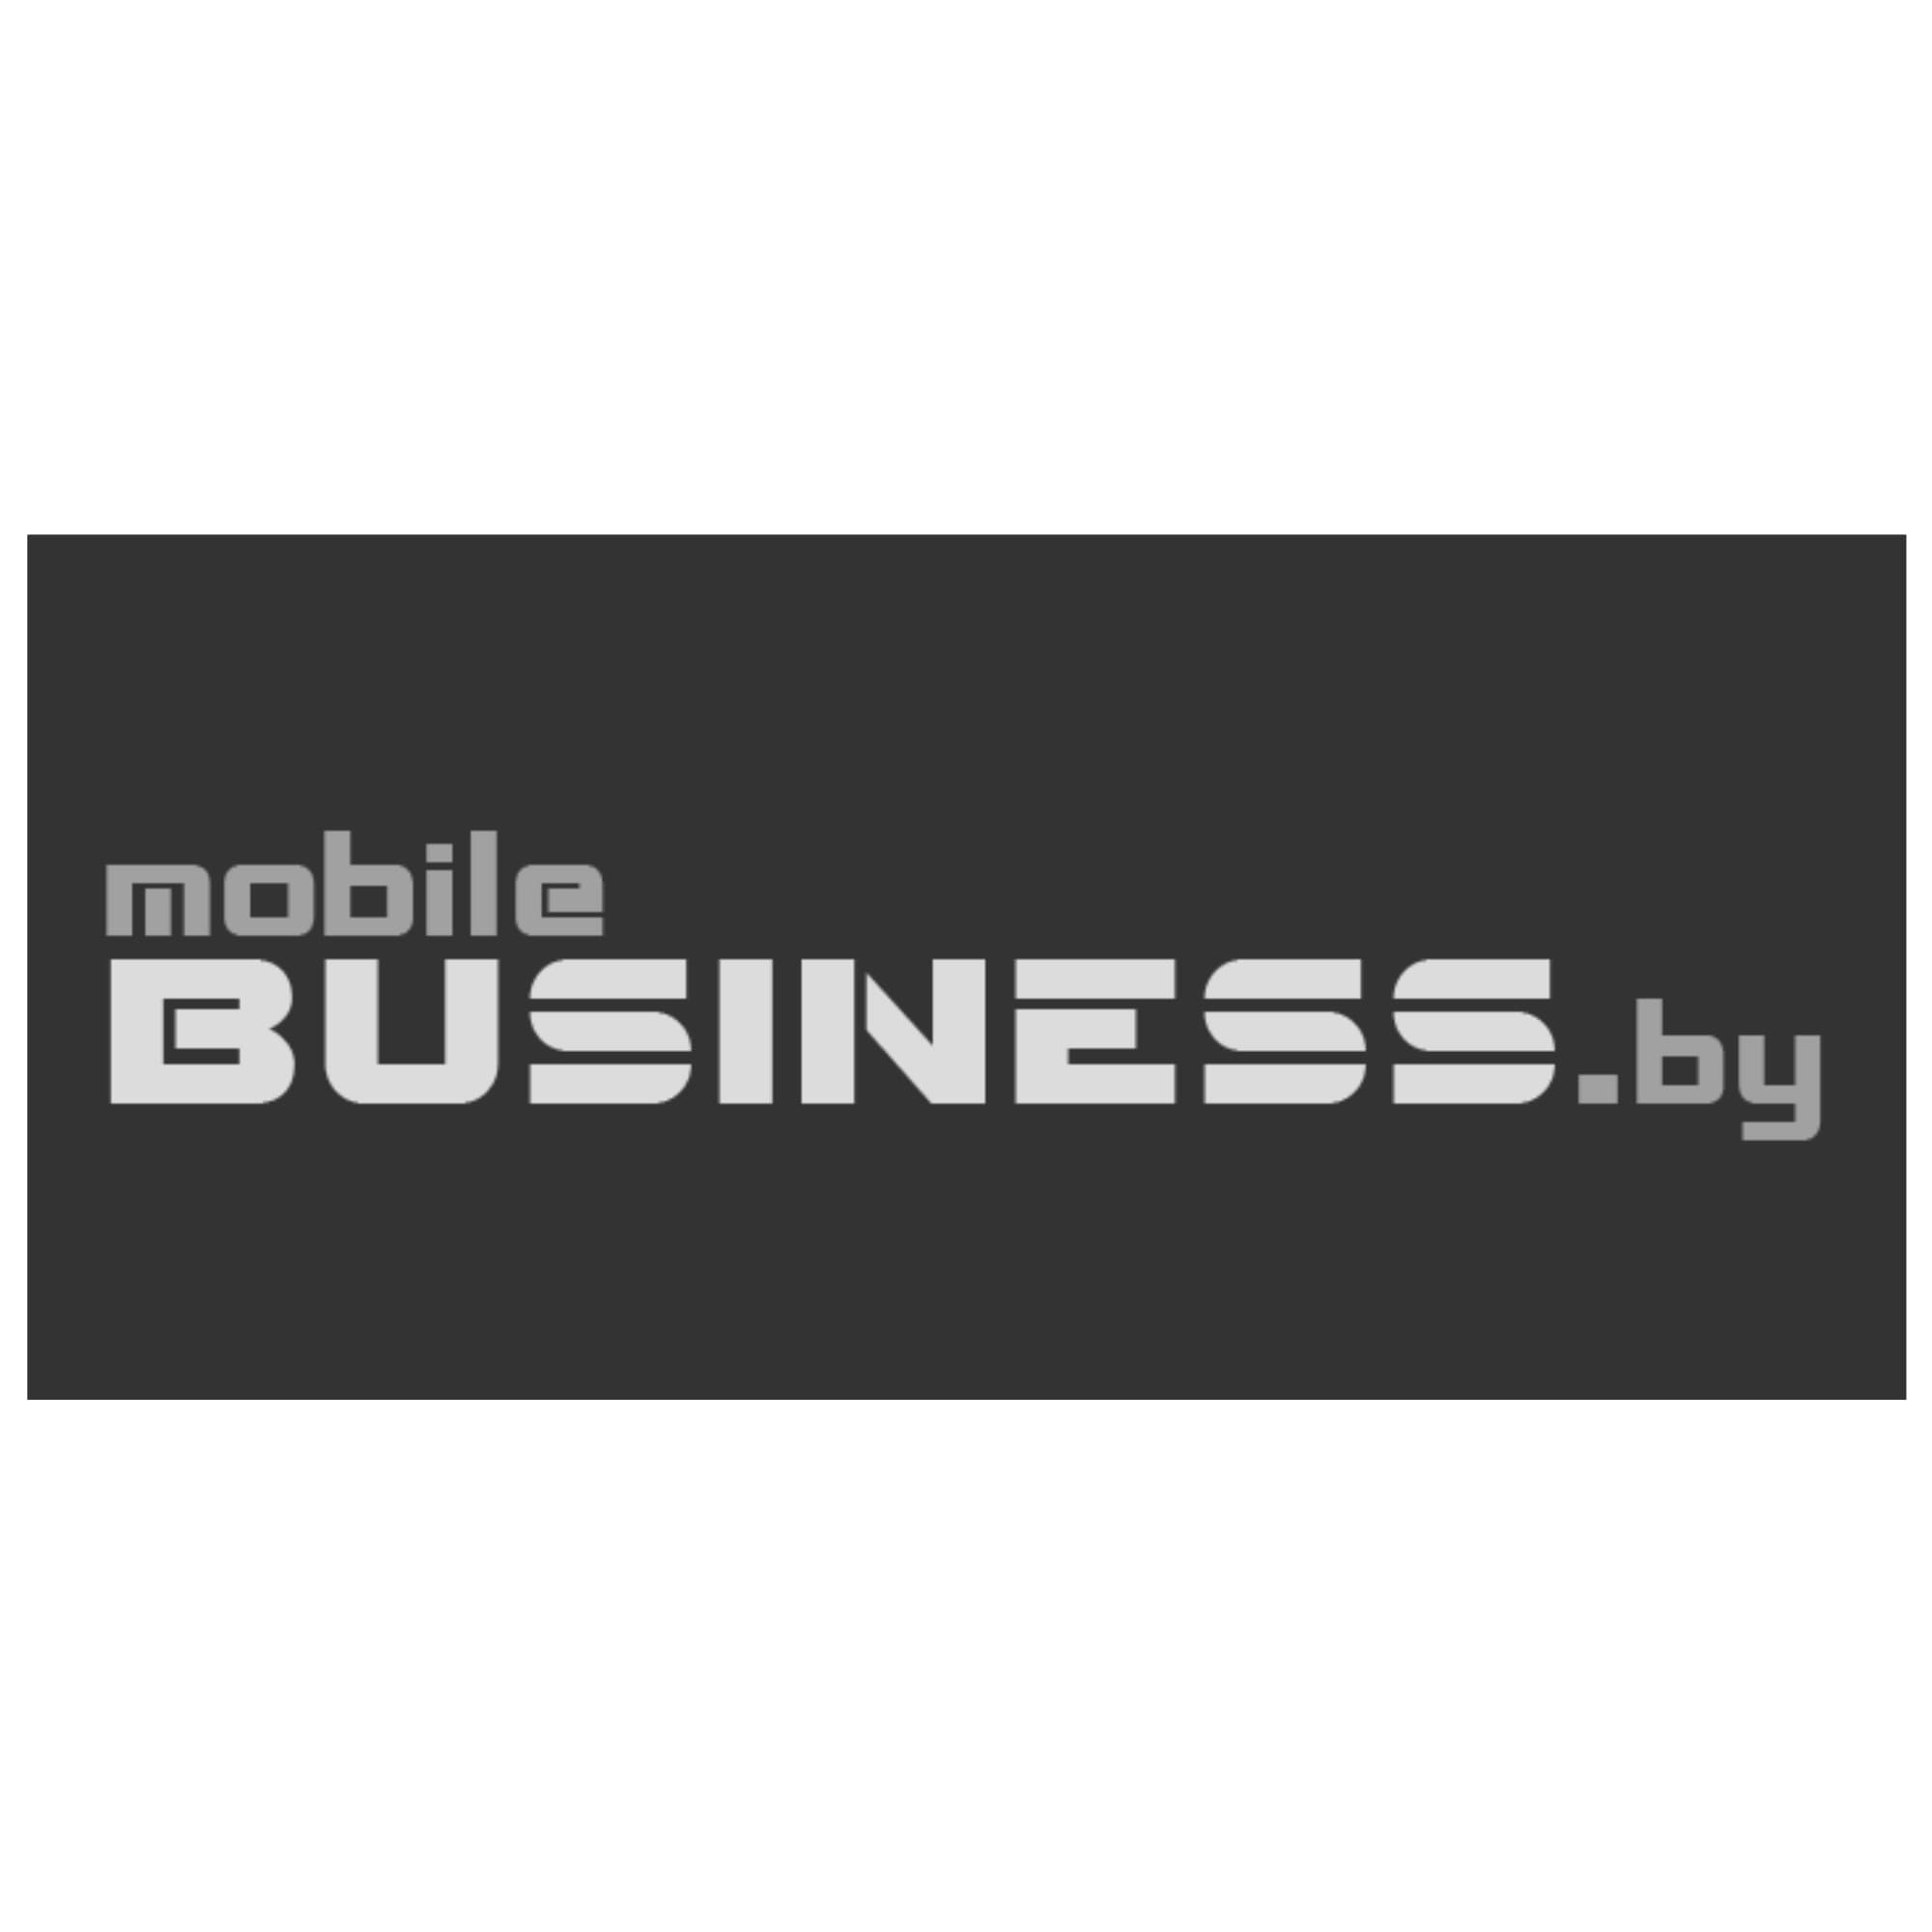 mobile-business